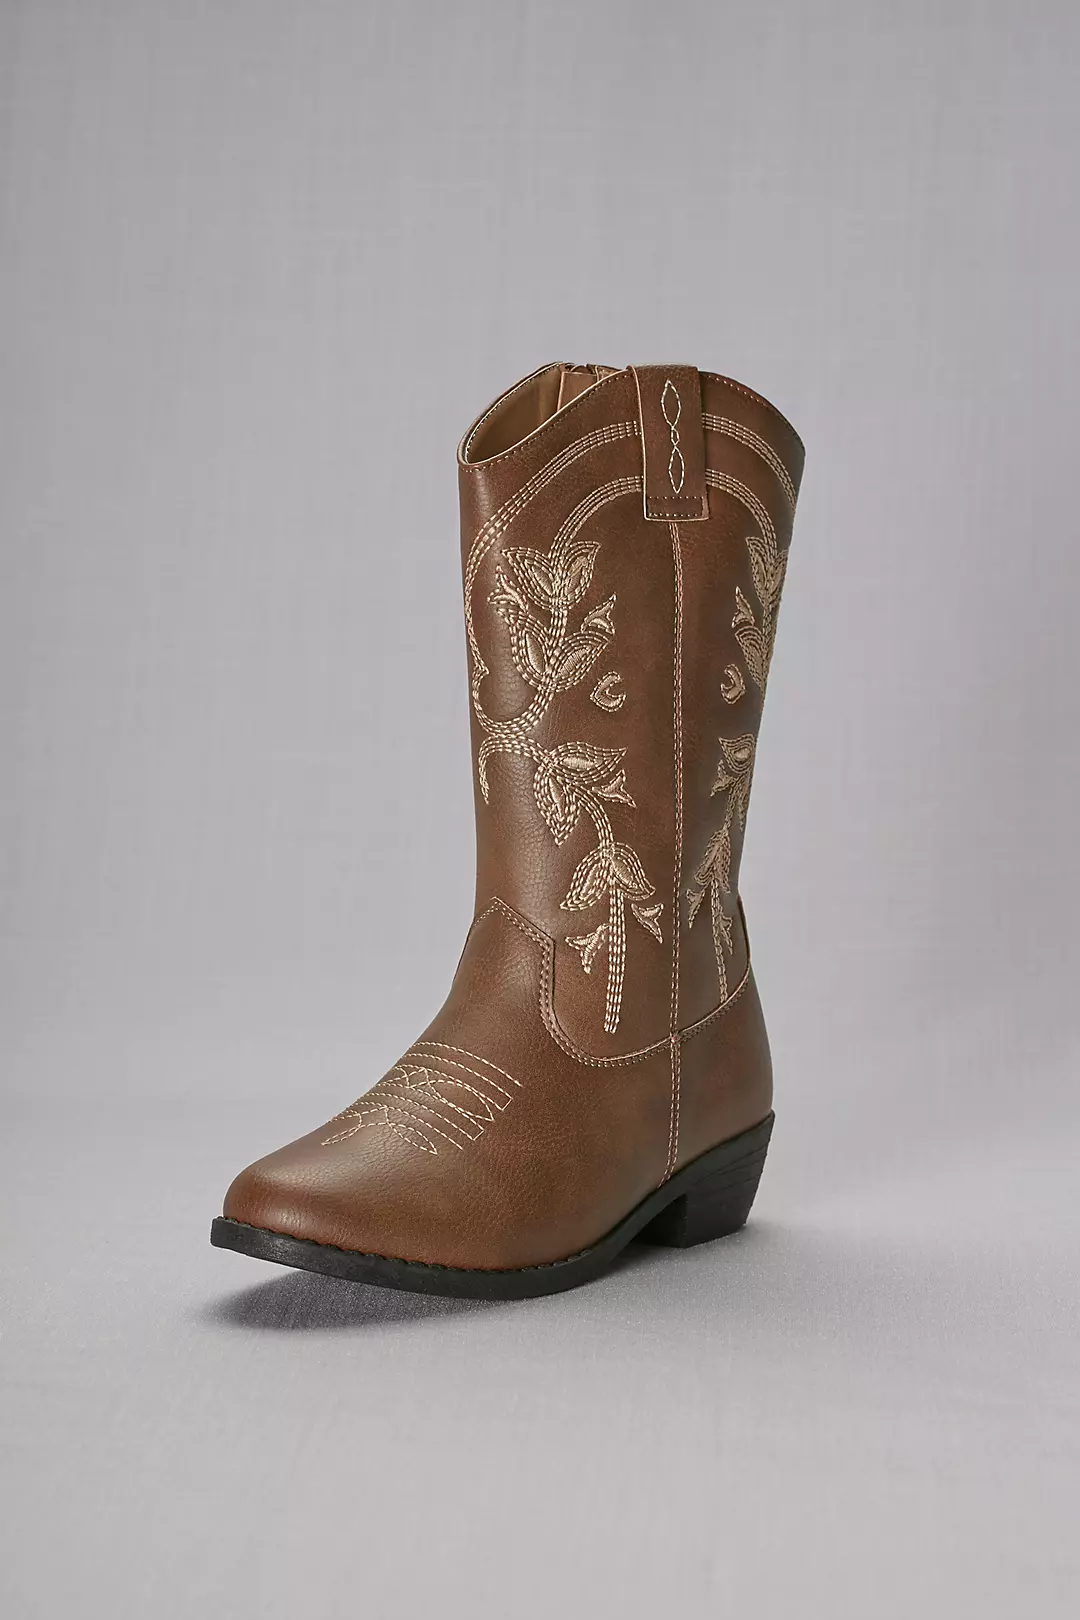 Girls Embroidered Cowboy Boots Image